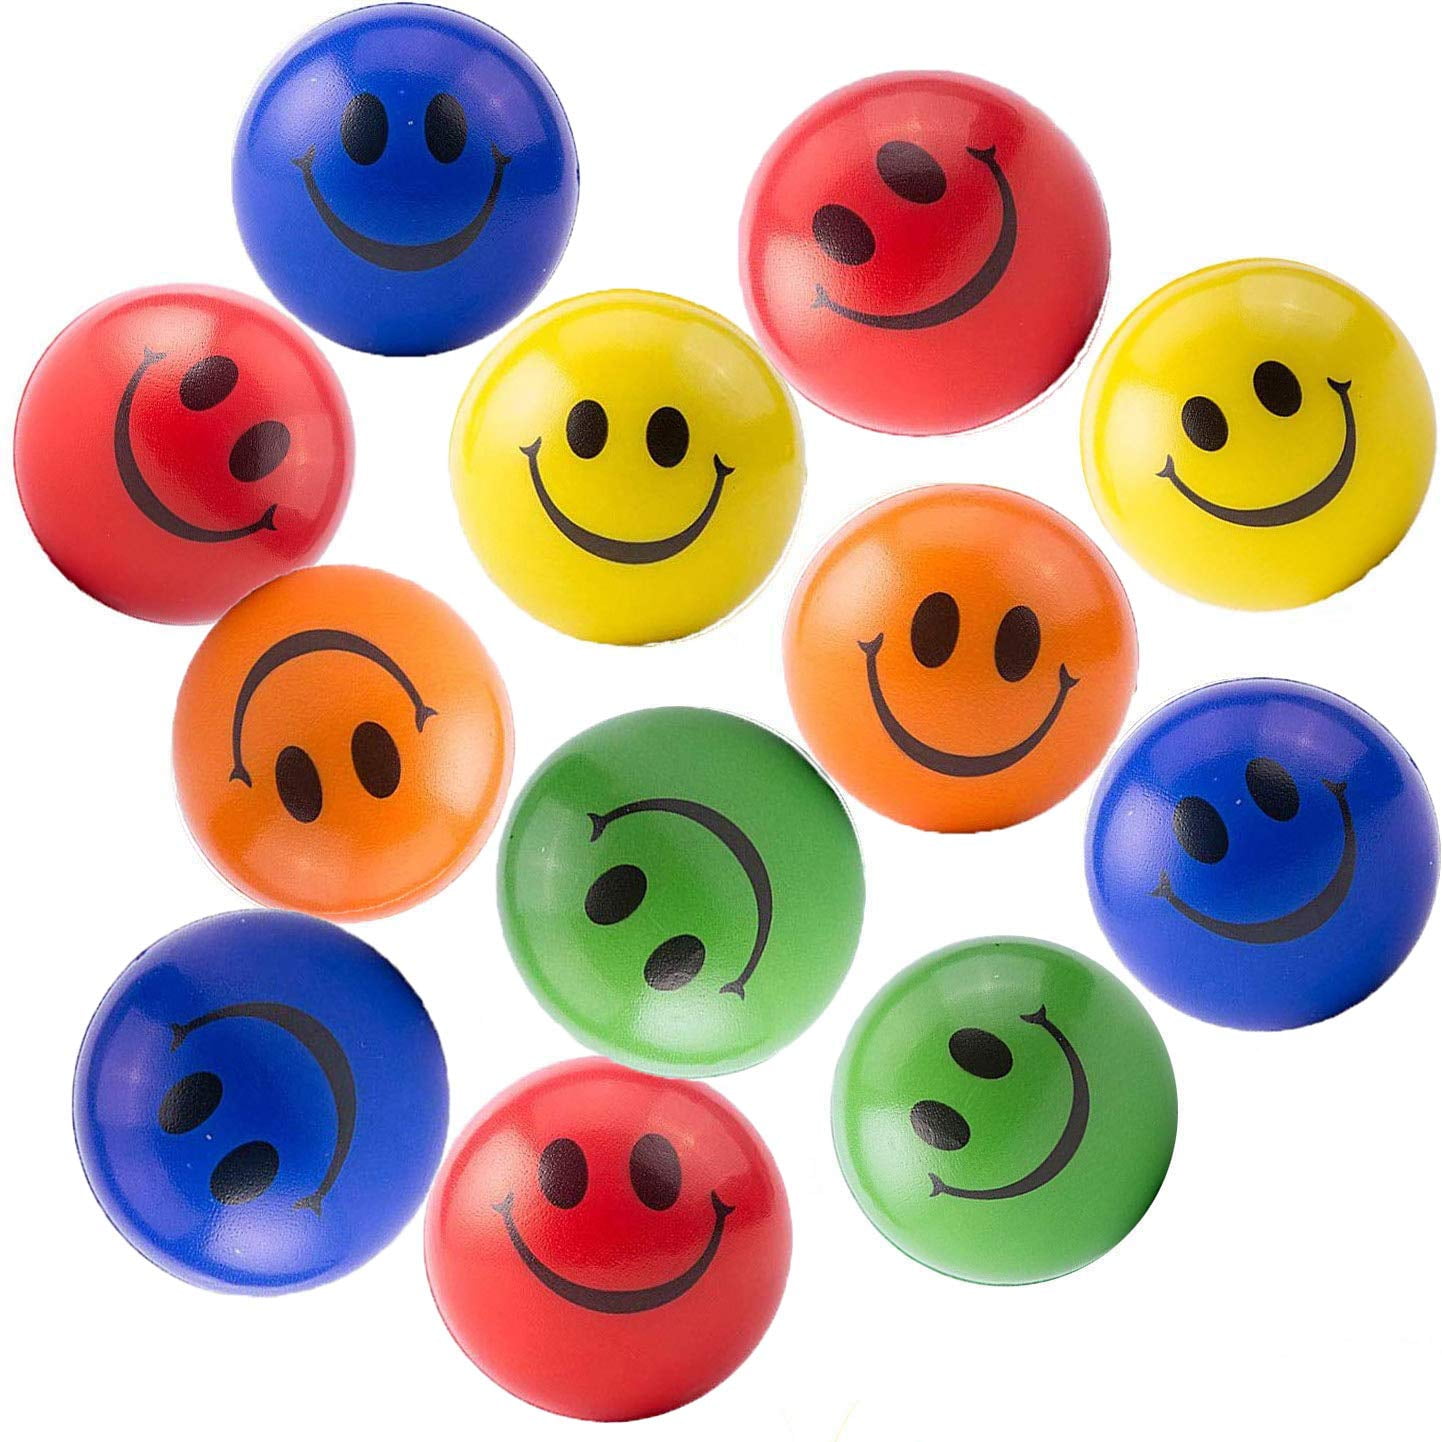 12 Hand Stress Mood Relief Mini Sponge Bouncy Squeeze Foam Ball Smile Face Toy 